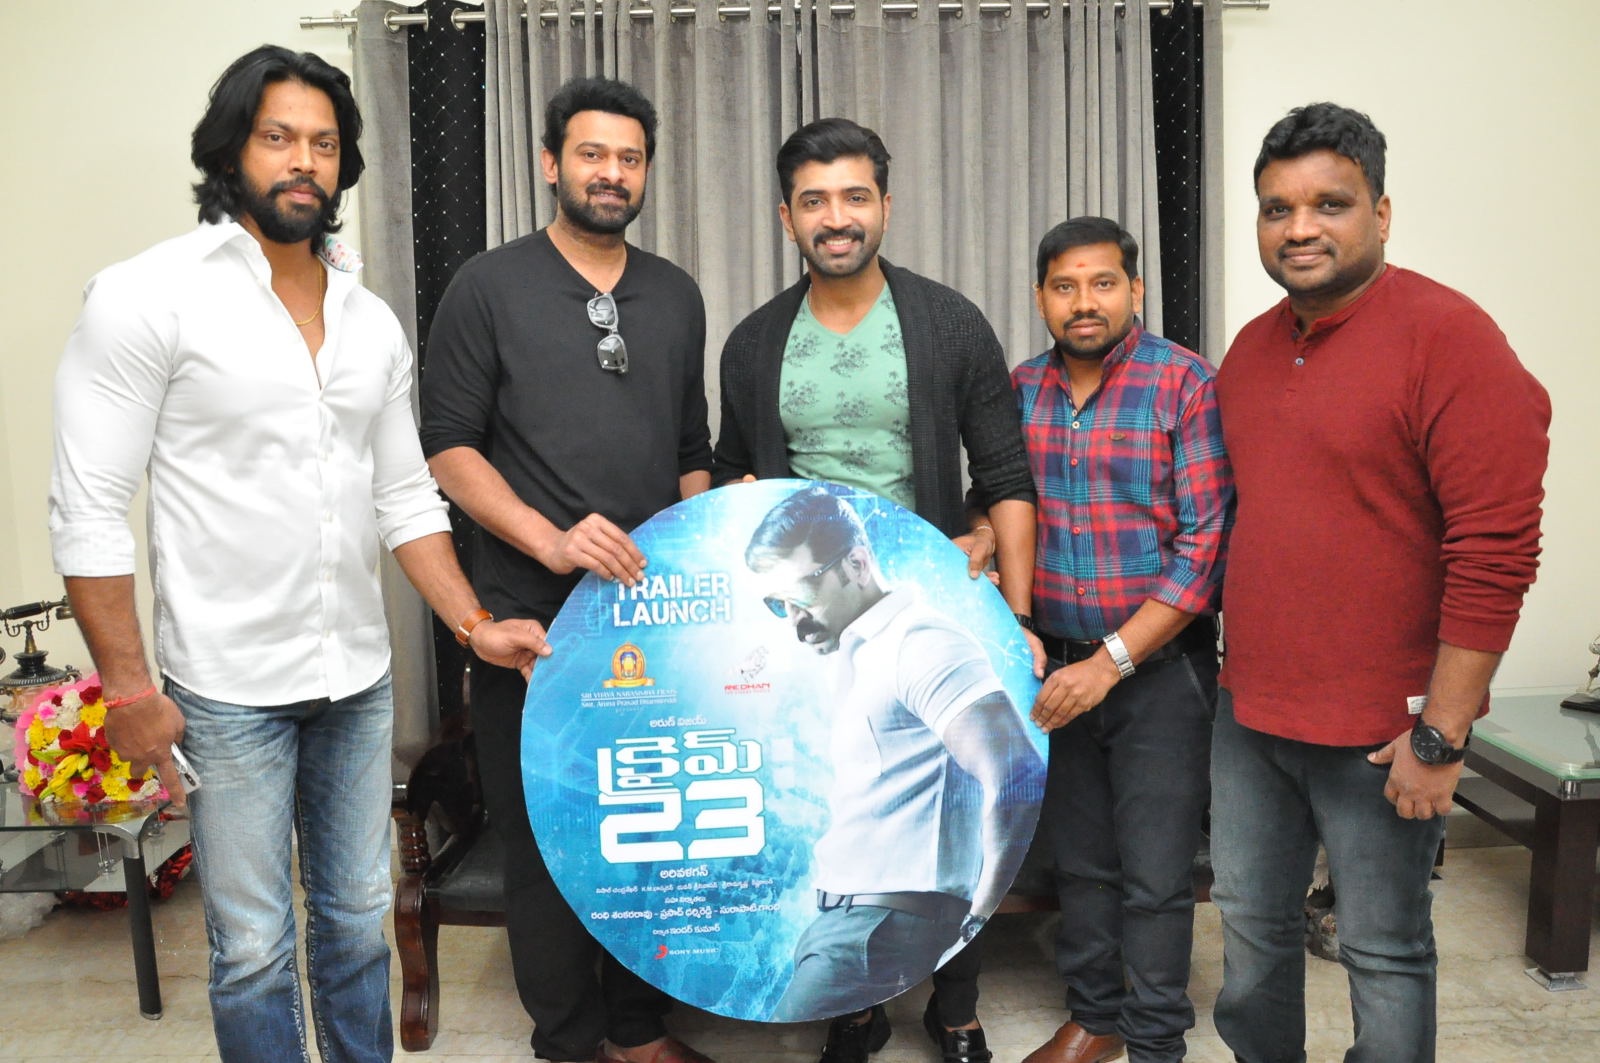 CRIME23 movie Trailer launch by Young Rebel Star Prabhas